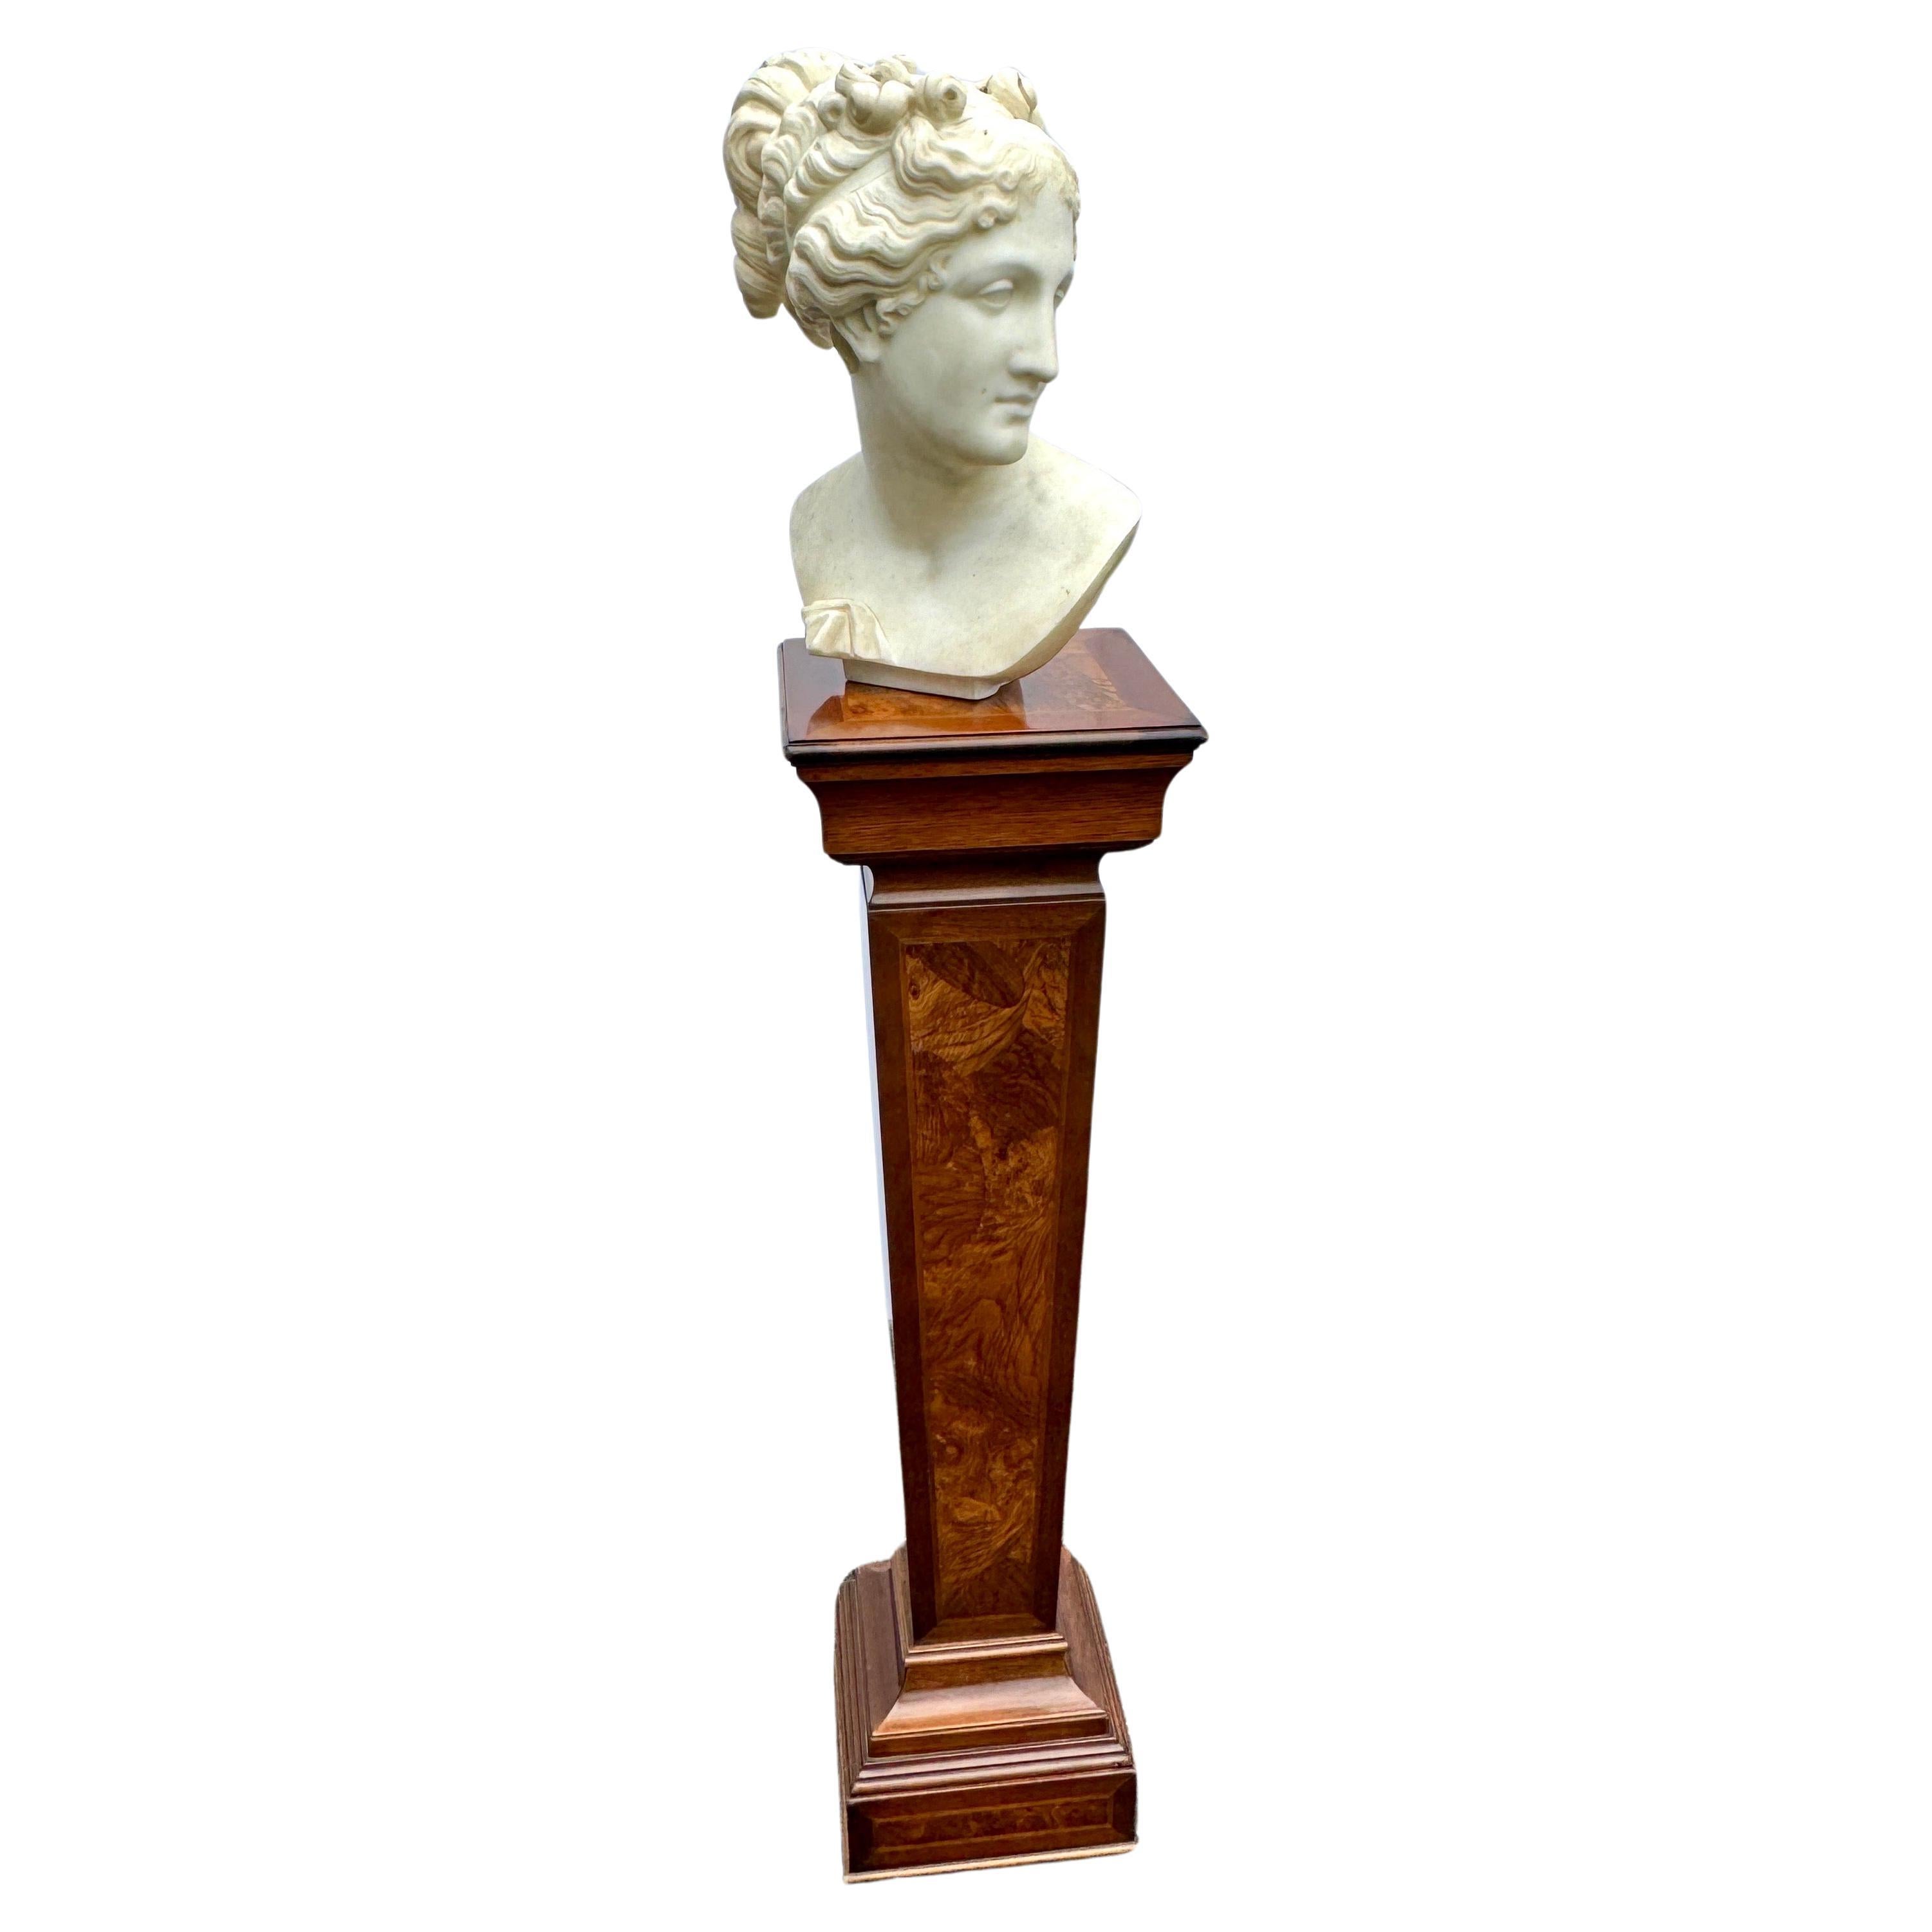 Impressive Italian Mid-Century Wood Pedestal or Plant Stand. This classic column style stand features wood on all sides. Certainly makes a wonderful addition to any home seeking a display piece in an entryway, library or living room setting. Marked